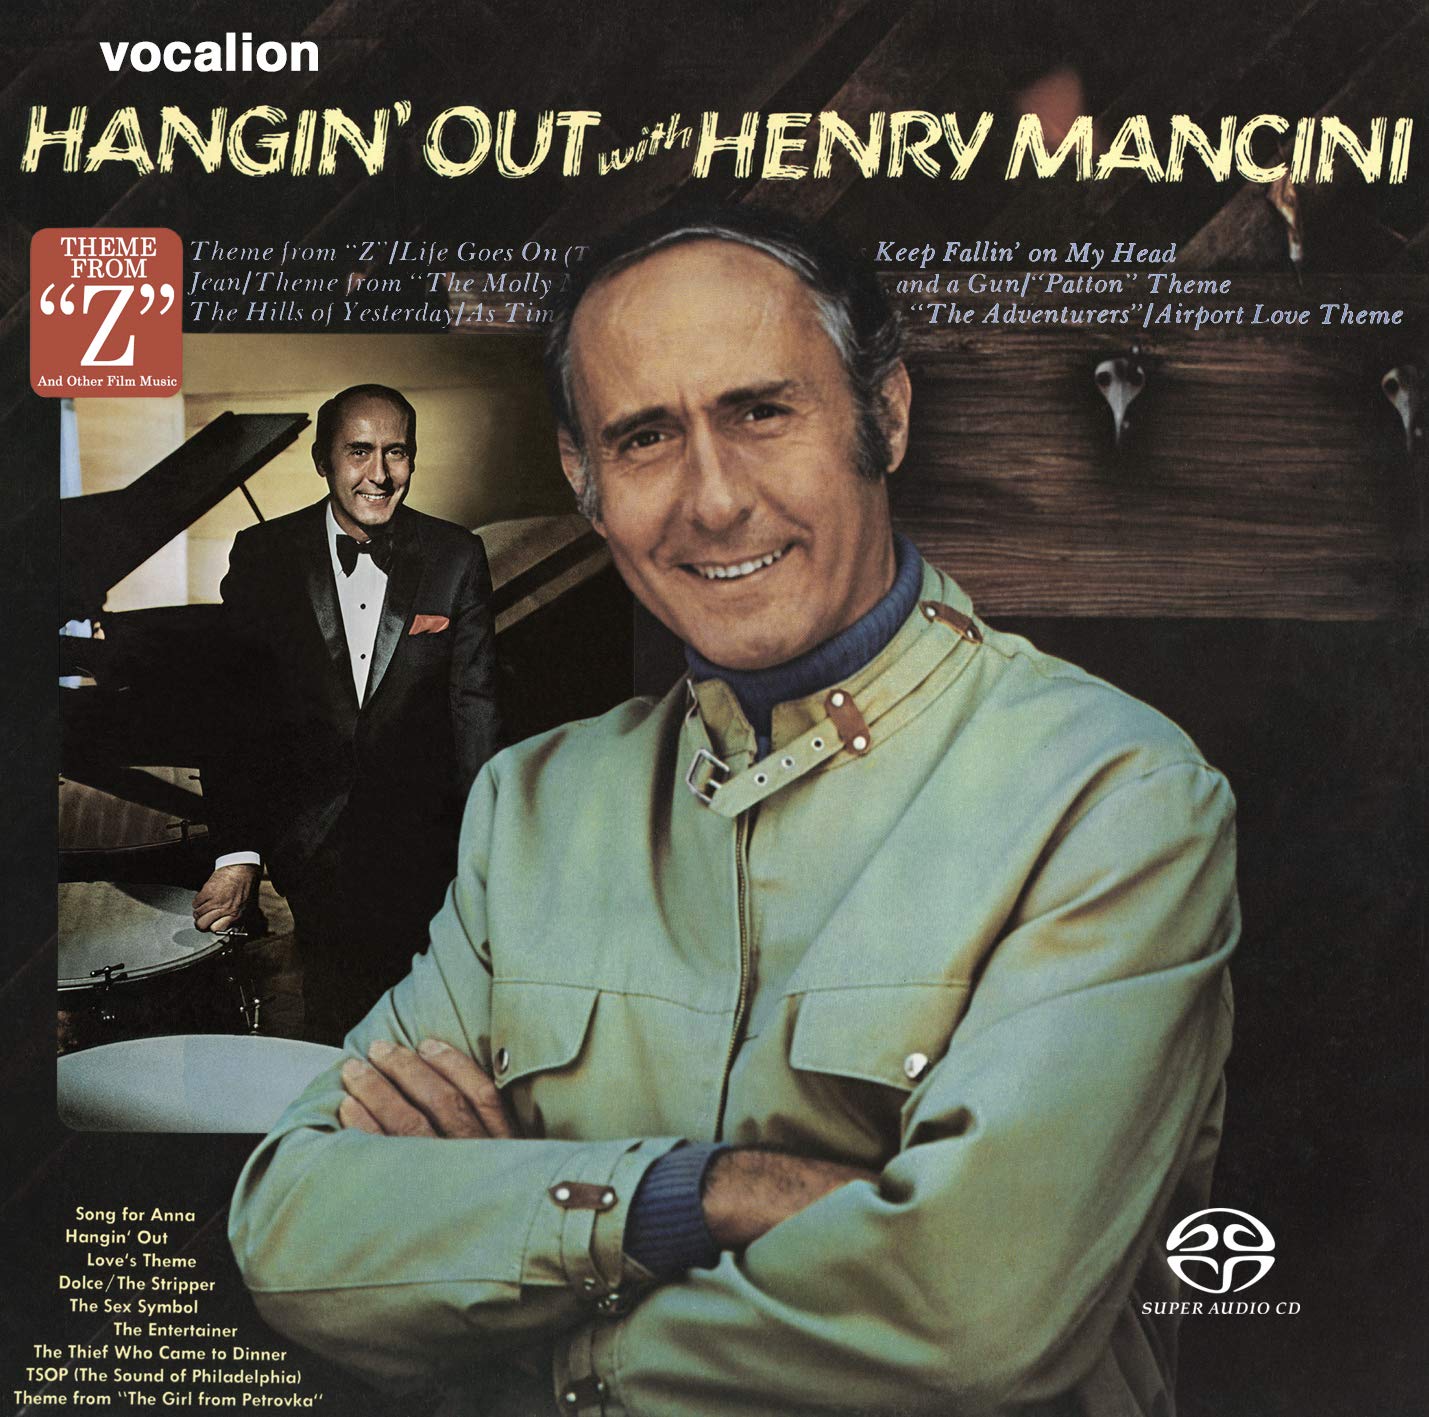 Henry Mancini – Hangin’ Out & Theme from Z (1974 & 1970) [Reissue 2019] MCH SACD ISO + FLAC 24bit/96kHz